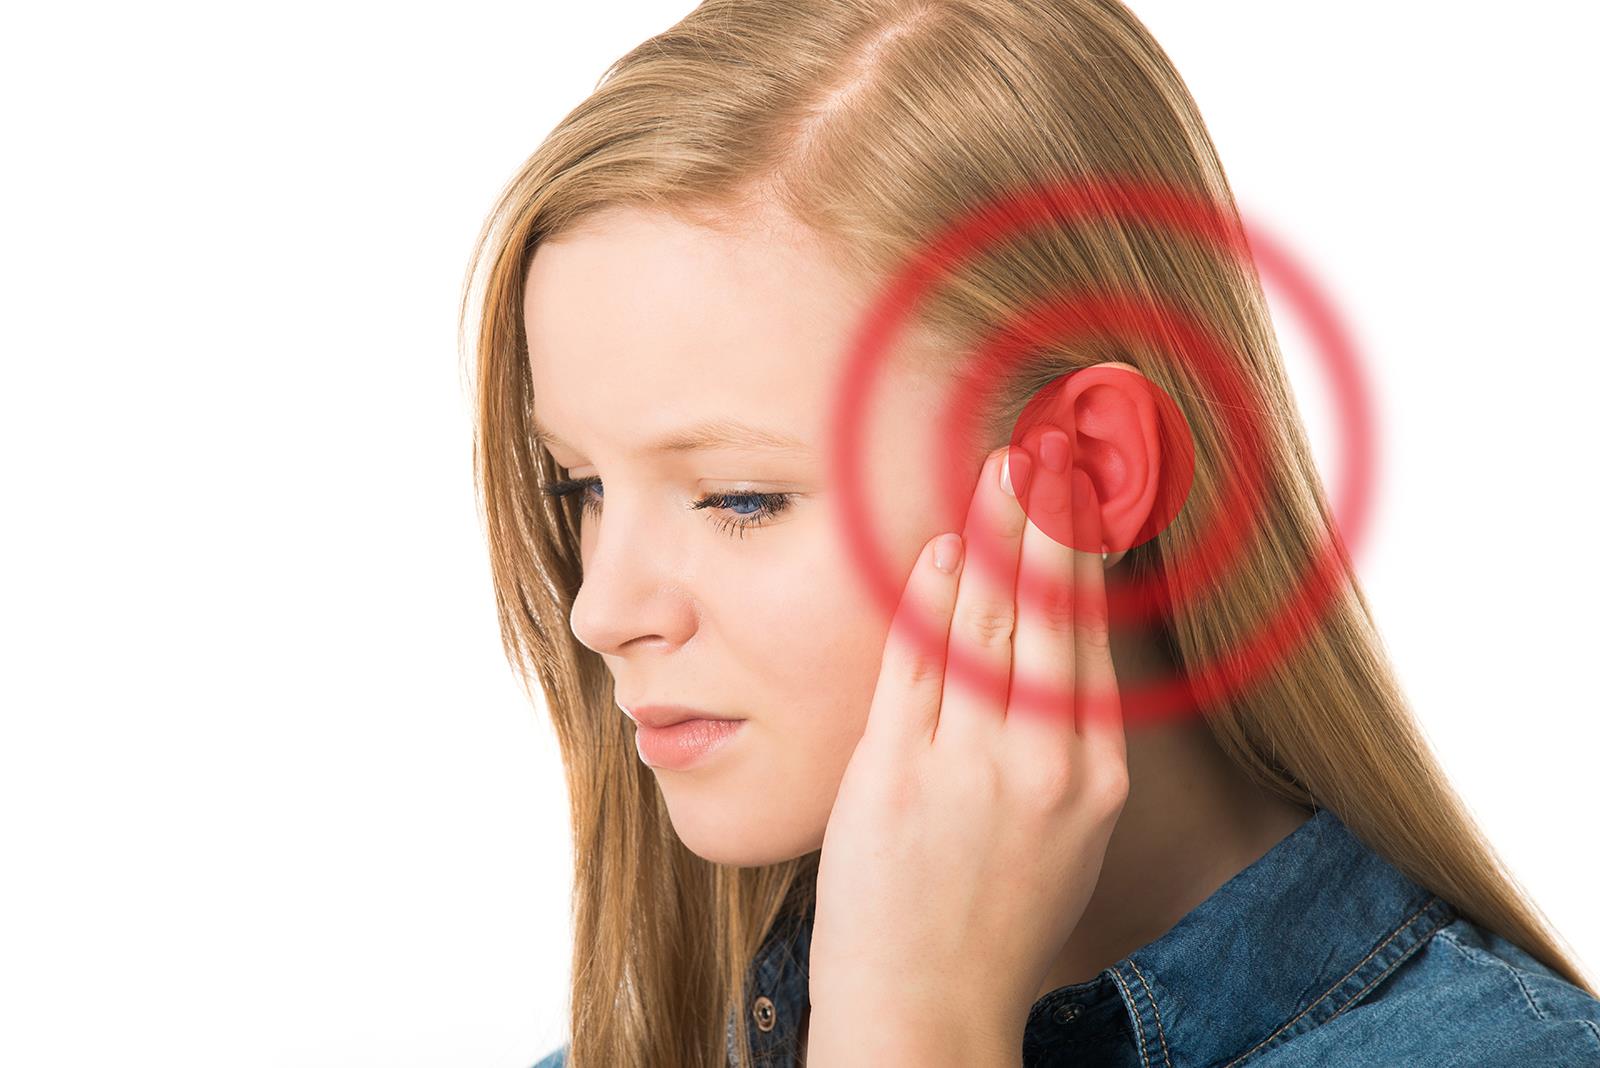 Tinnitus: Ringing in the ears and how to find relief